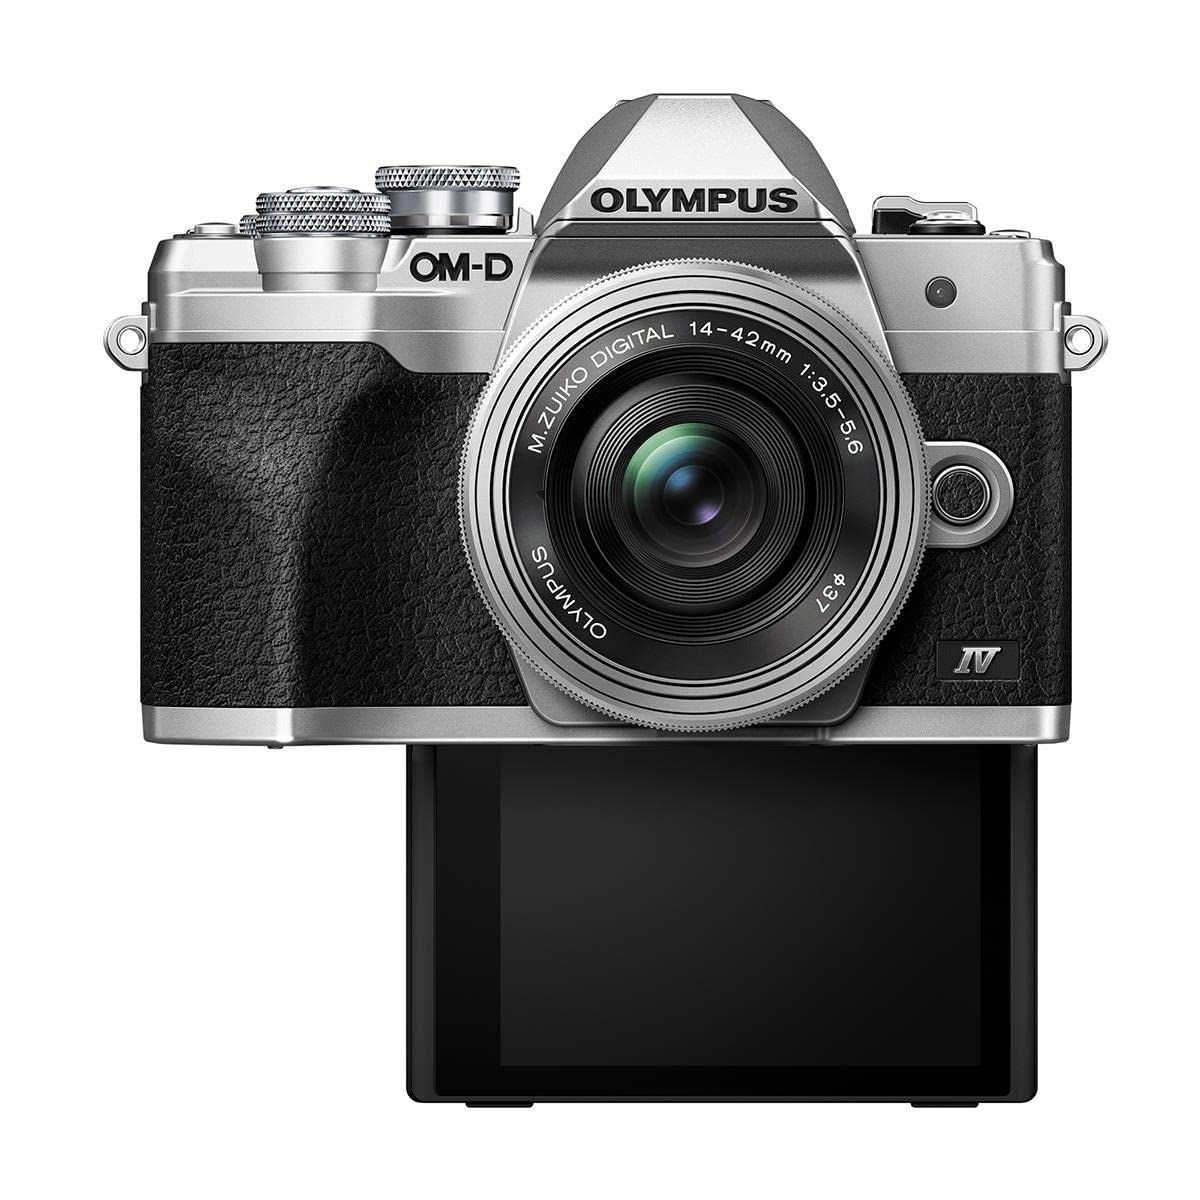 Olympus OM-D E-M10 Mark IV Camera with M.Zuiko ED 14-42mm F3.5-5.6 EZ Lens, Silver Bundle with 64GB SD Card, Shoulder Bag, Extra Battery, Smart Charger